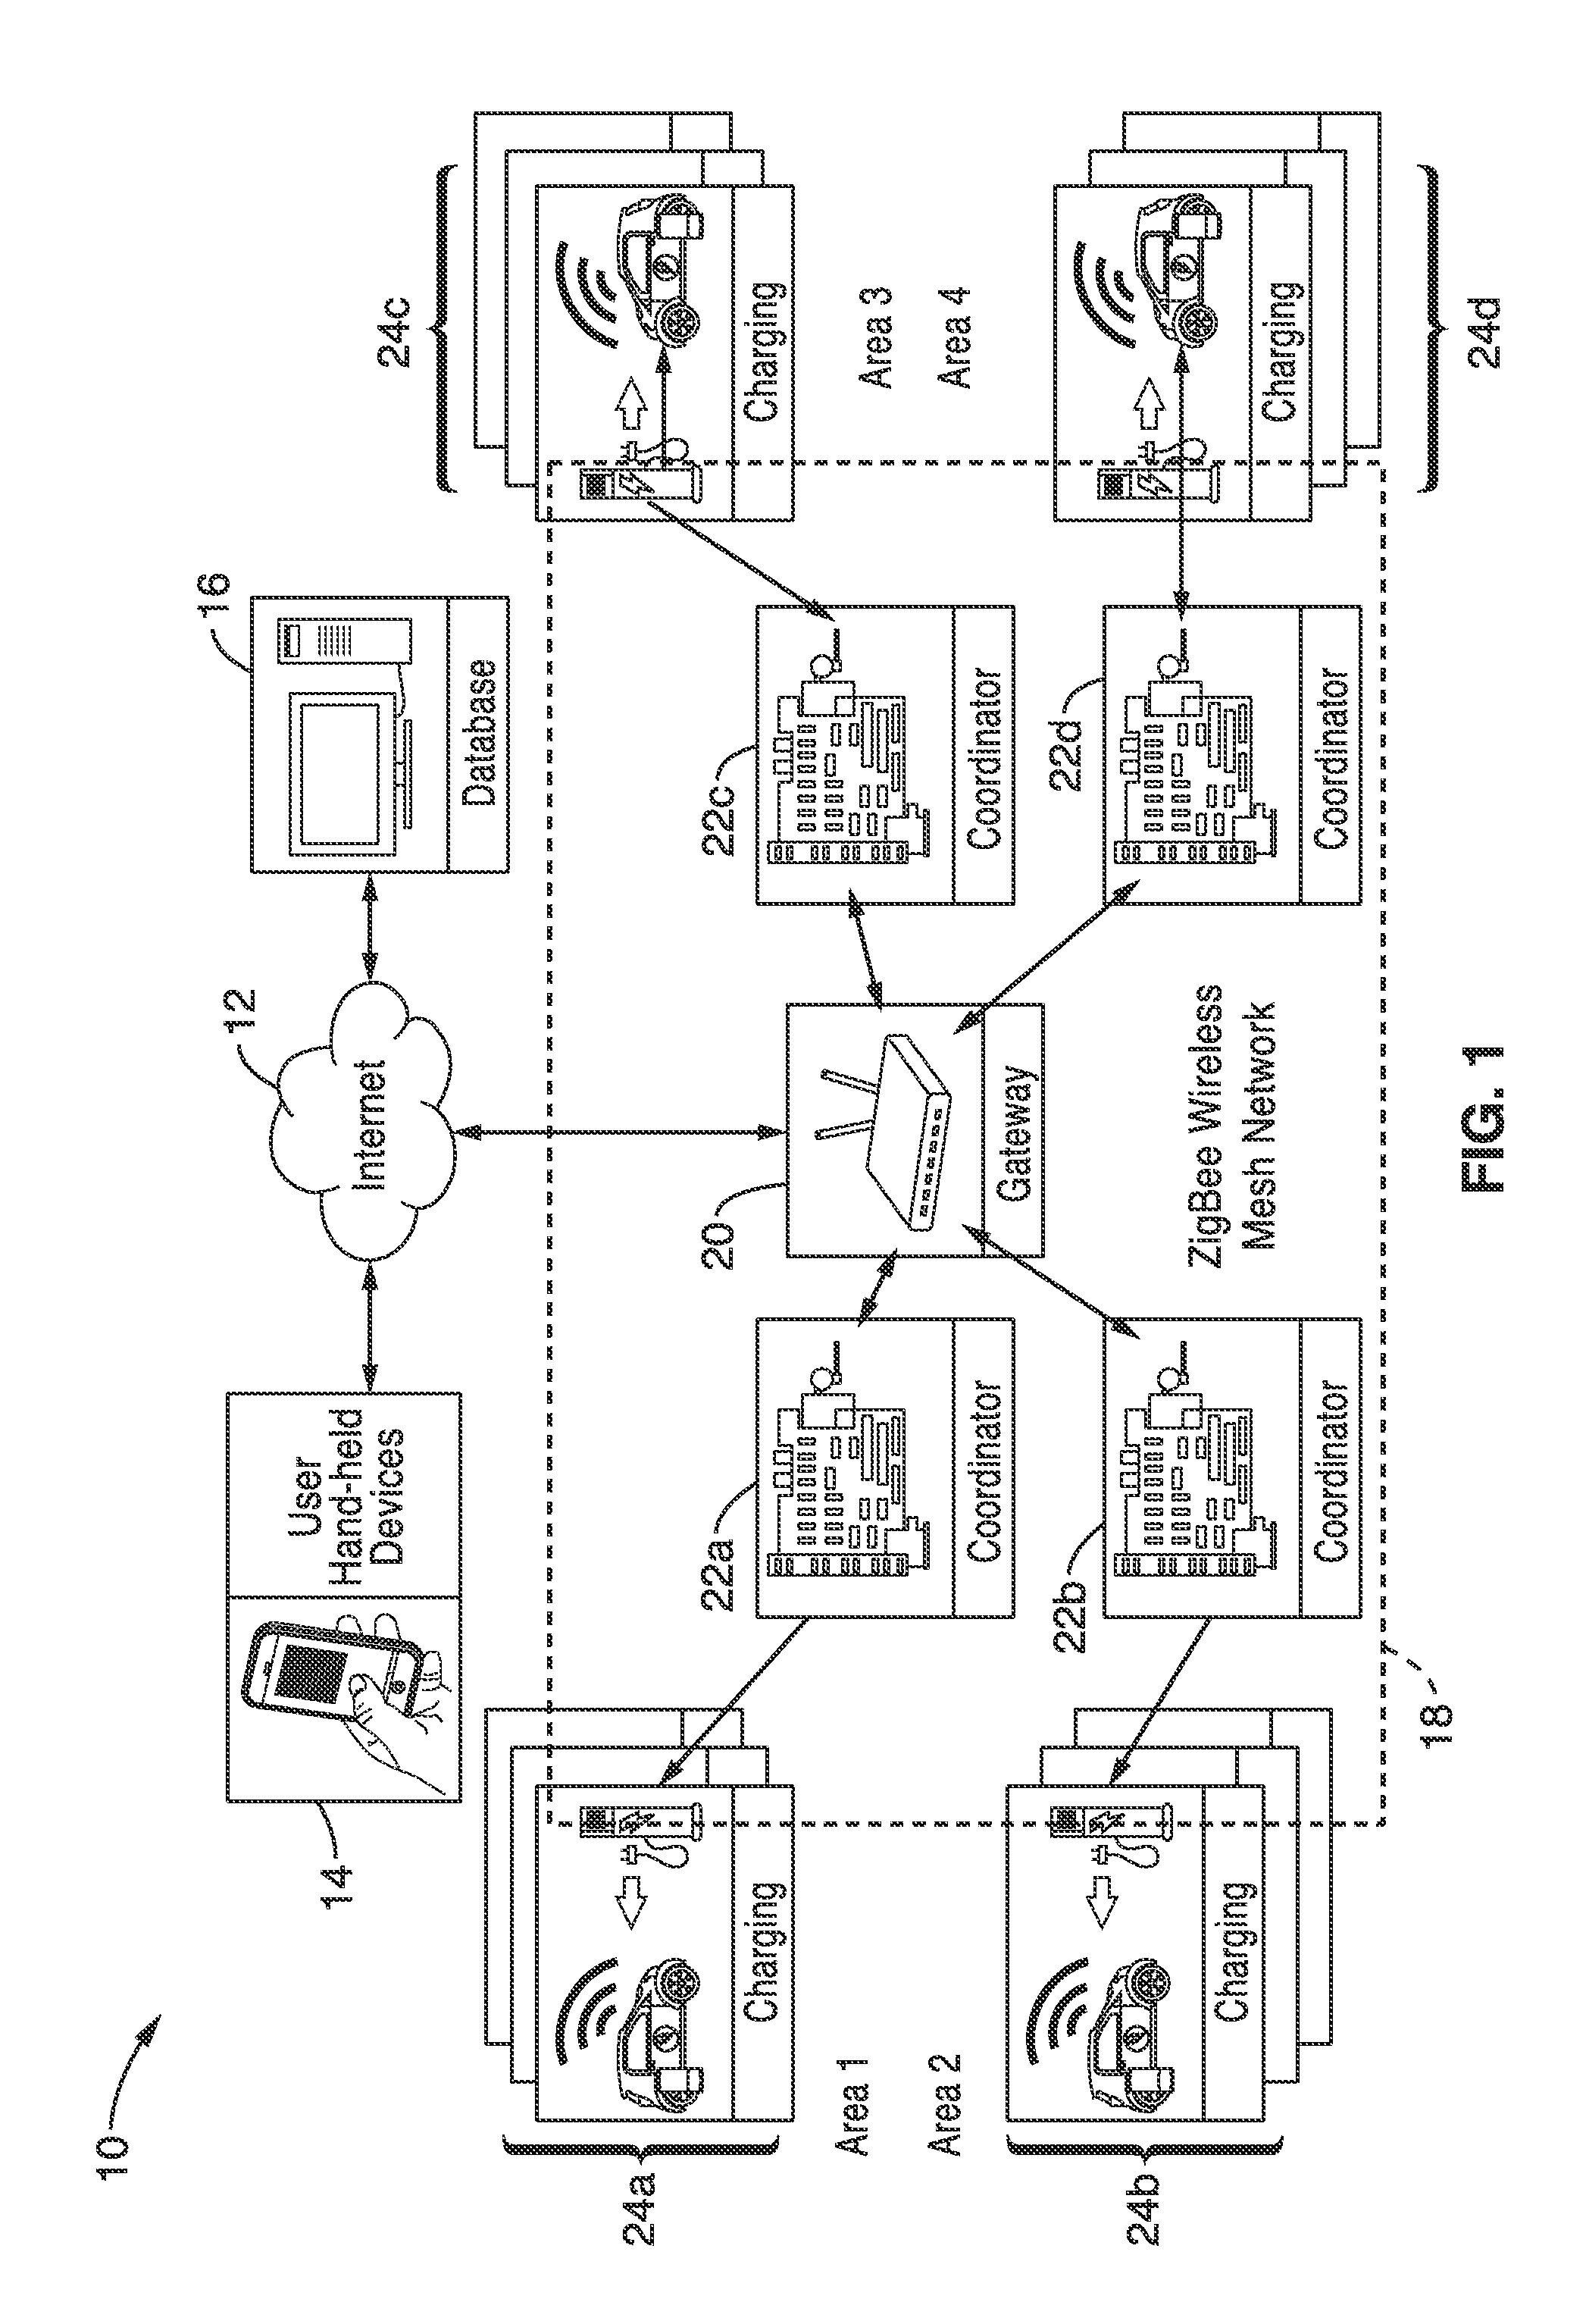 Power control apparatus and methods for electric vehicles